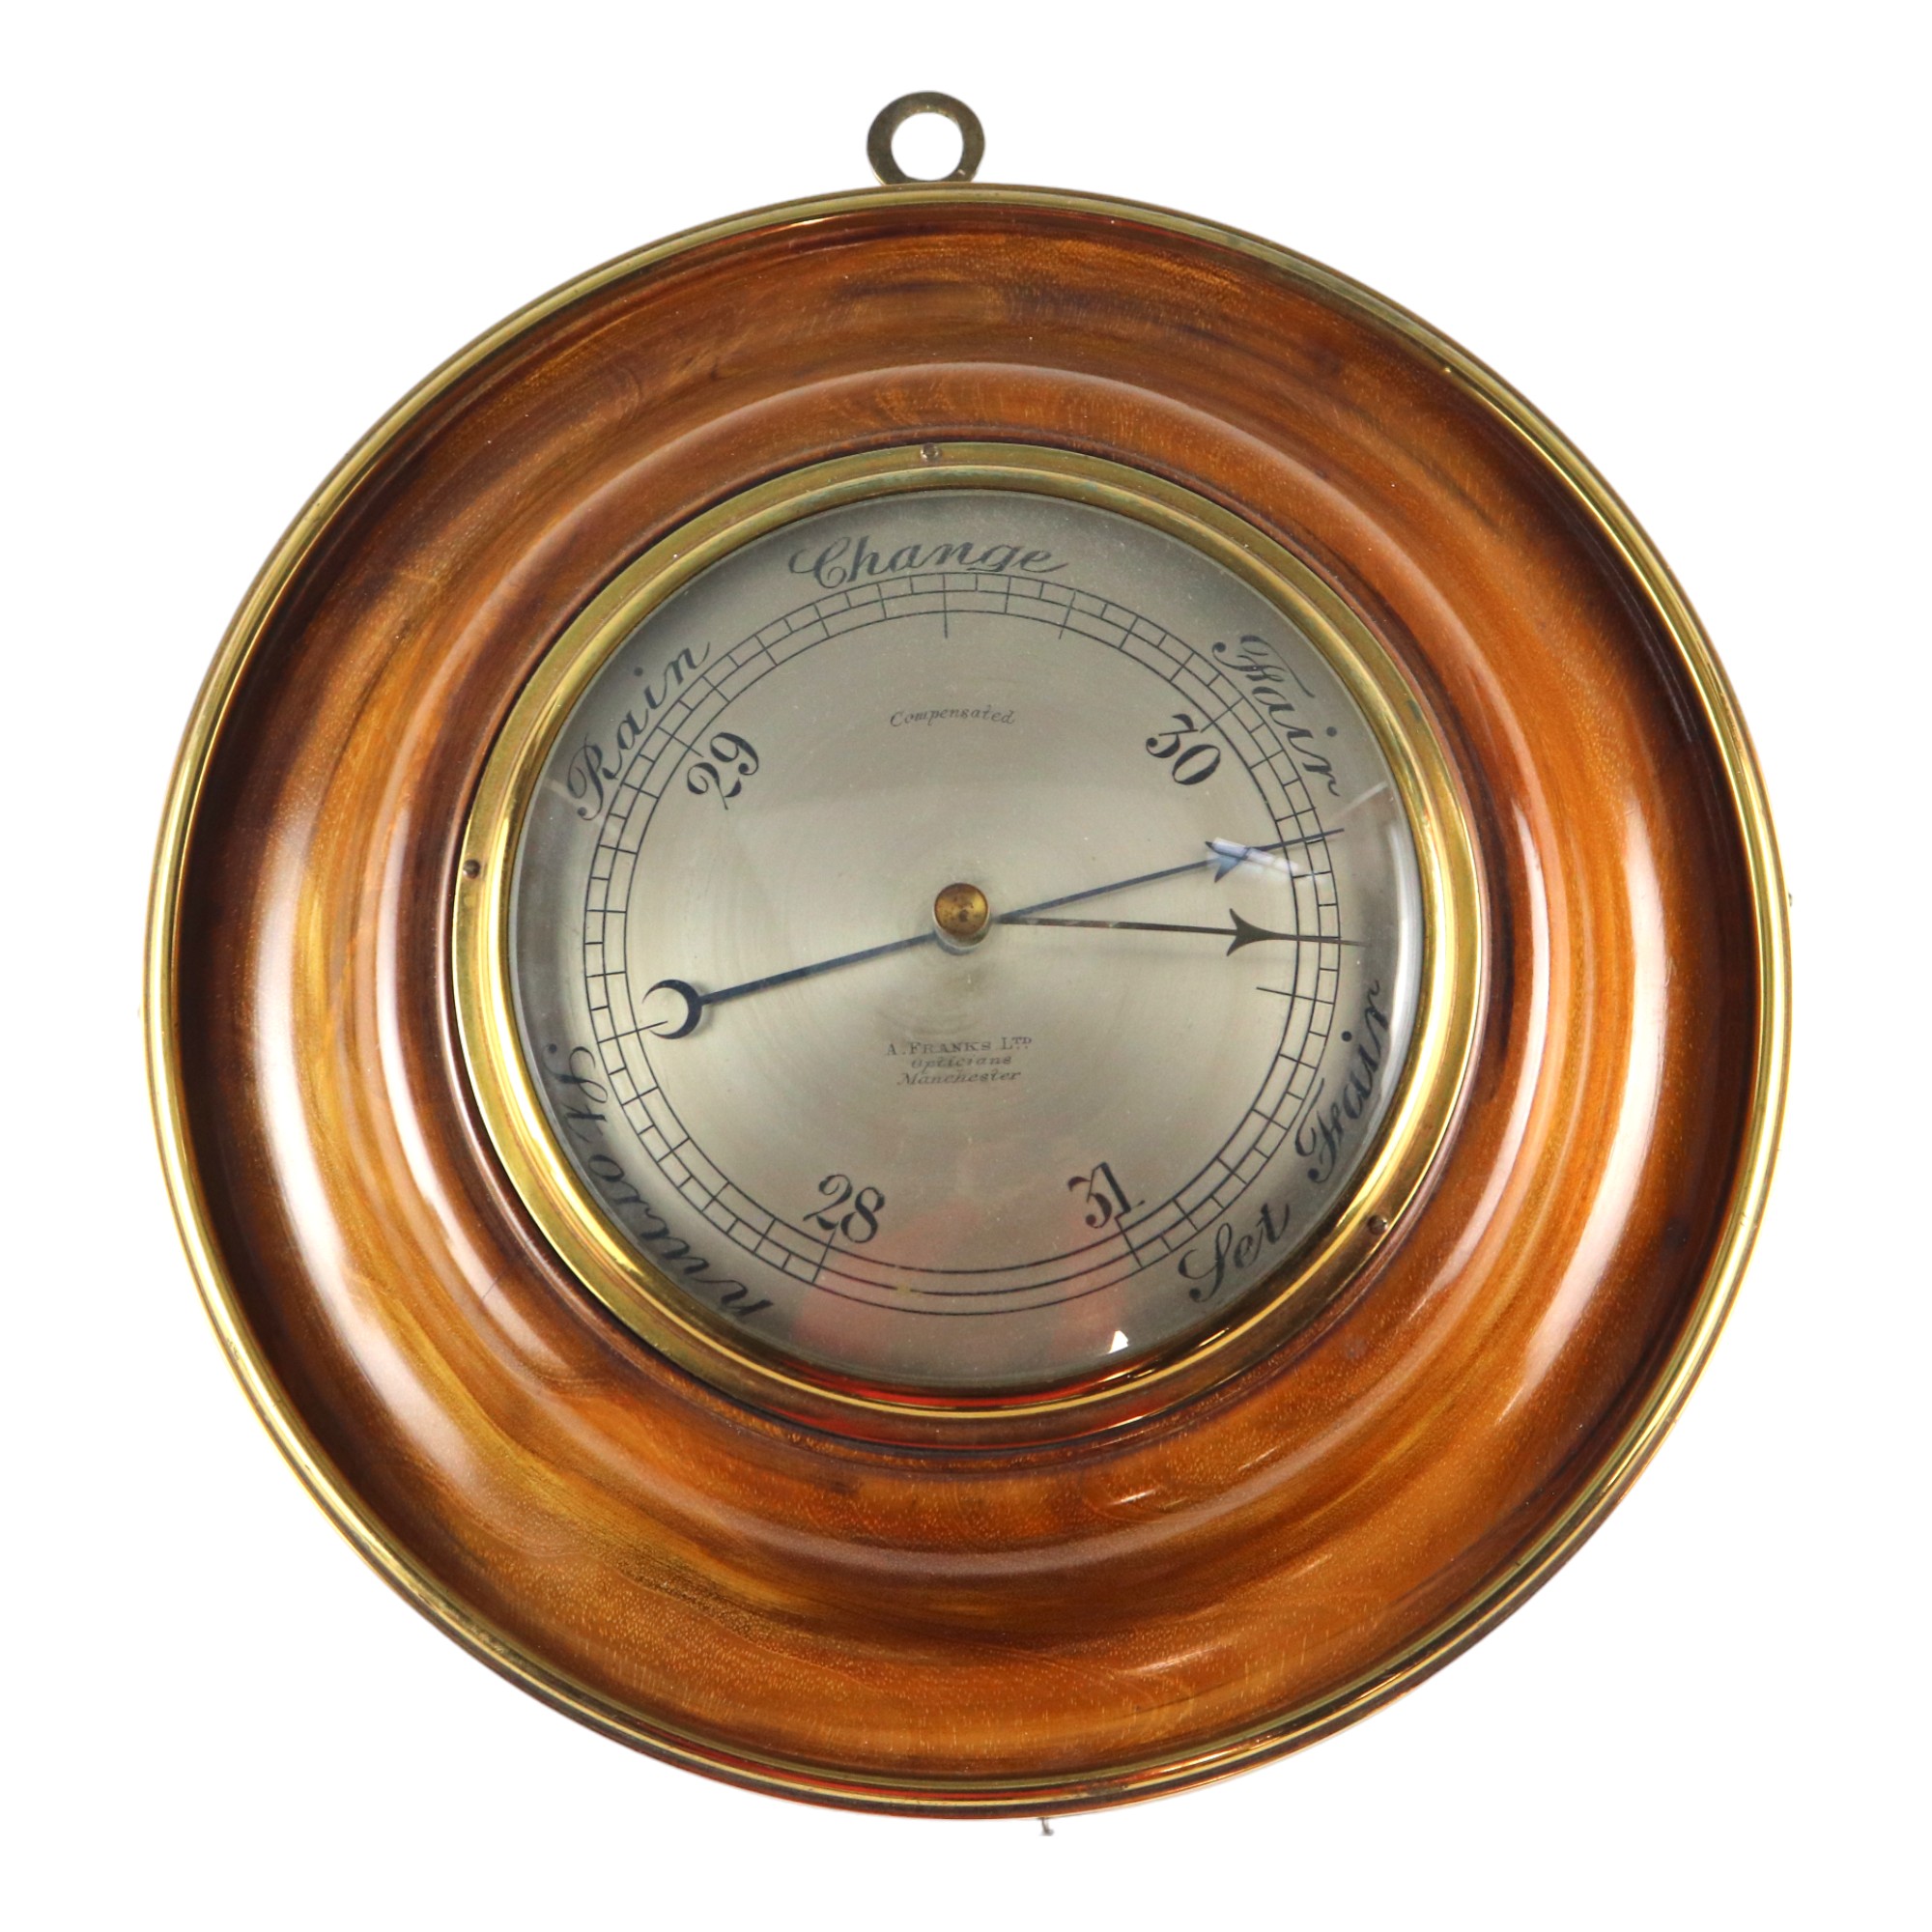 Am aneroid wall barometer by A Franks Ltd, opticians, Manchester, having a convex silvered dial